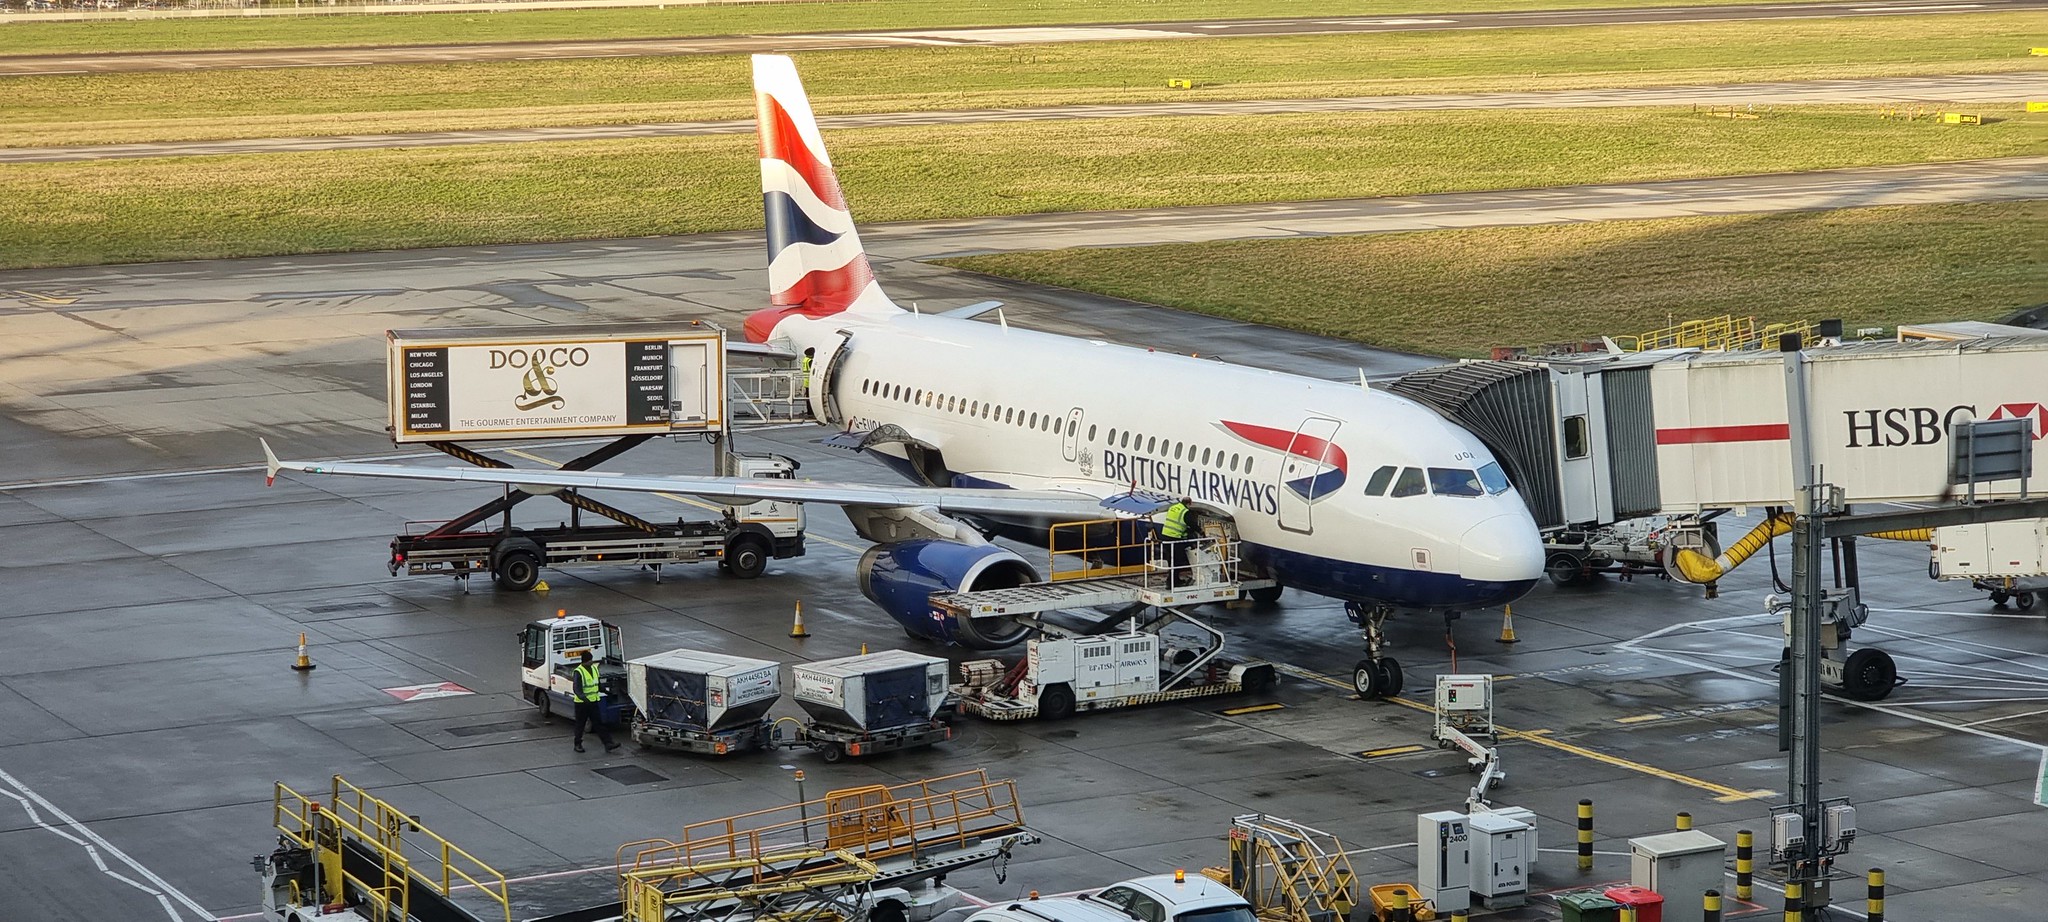 A BA short haul aircraft waiting to depart from T5